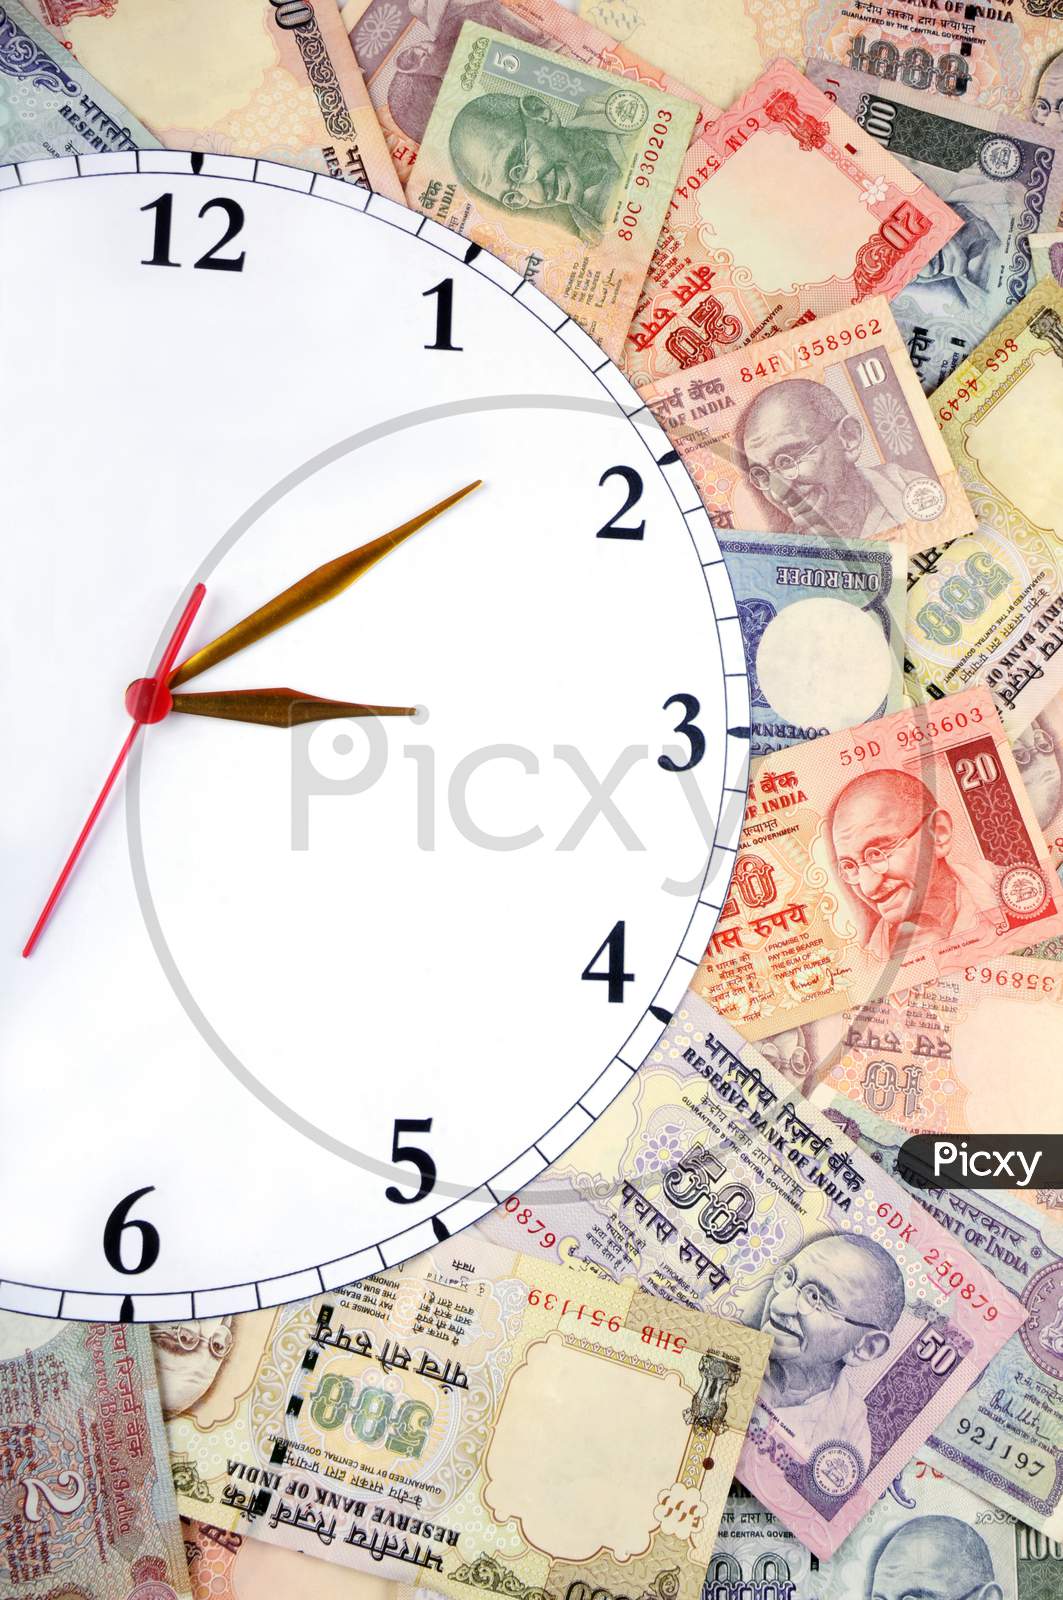 Time Is Money